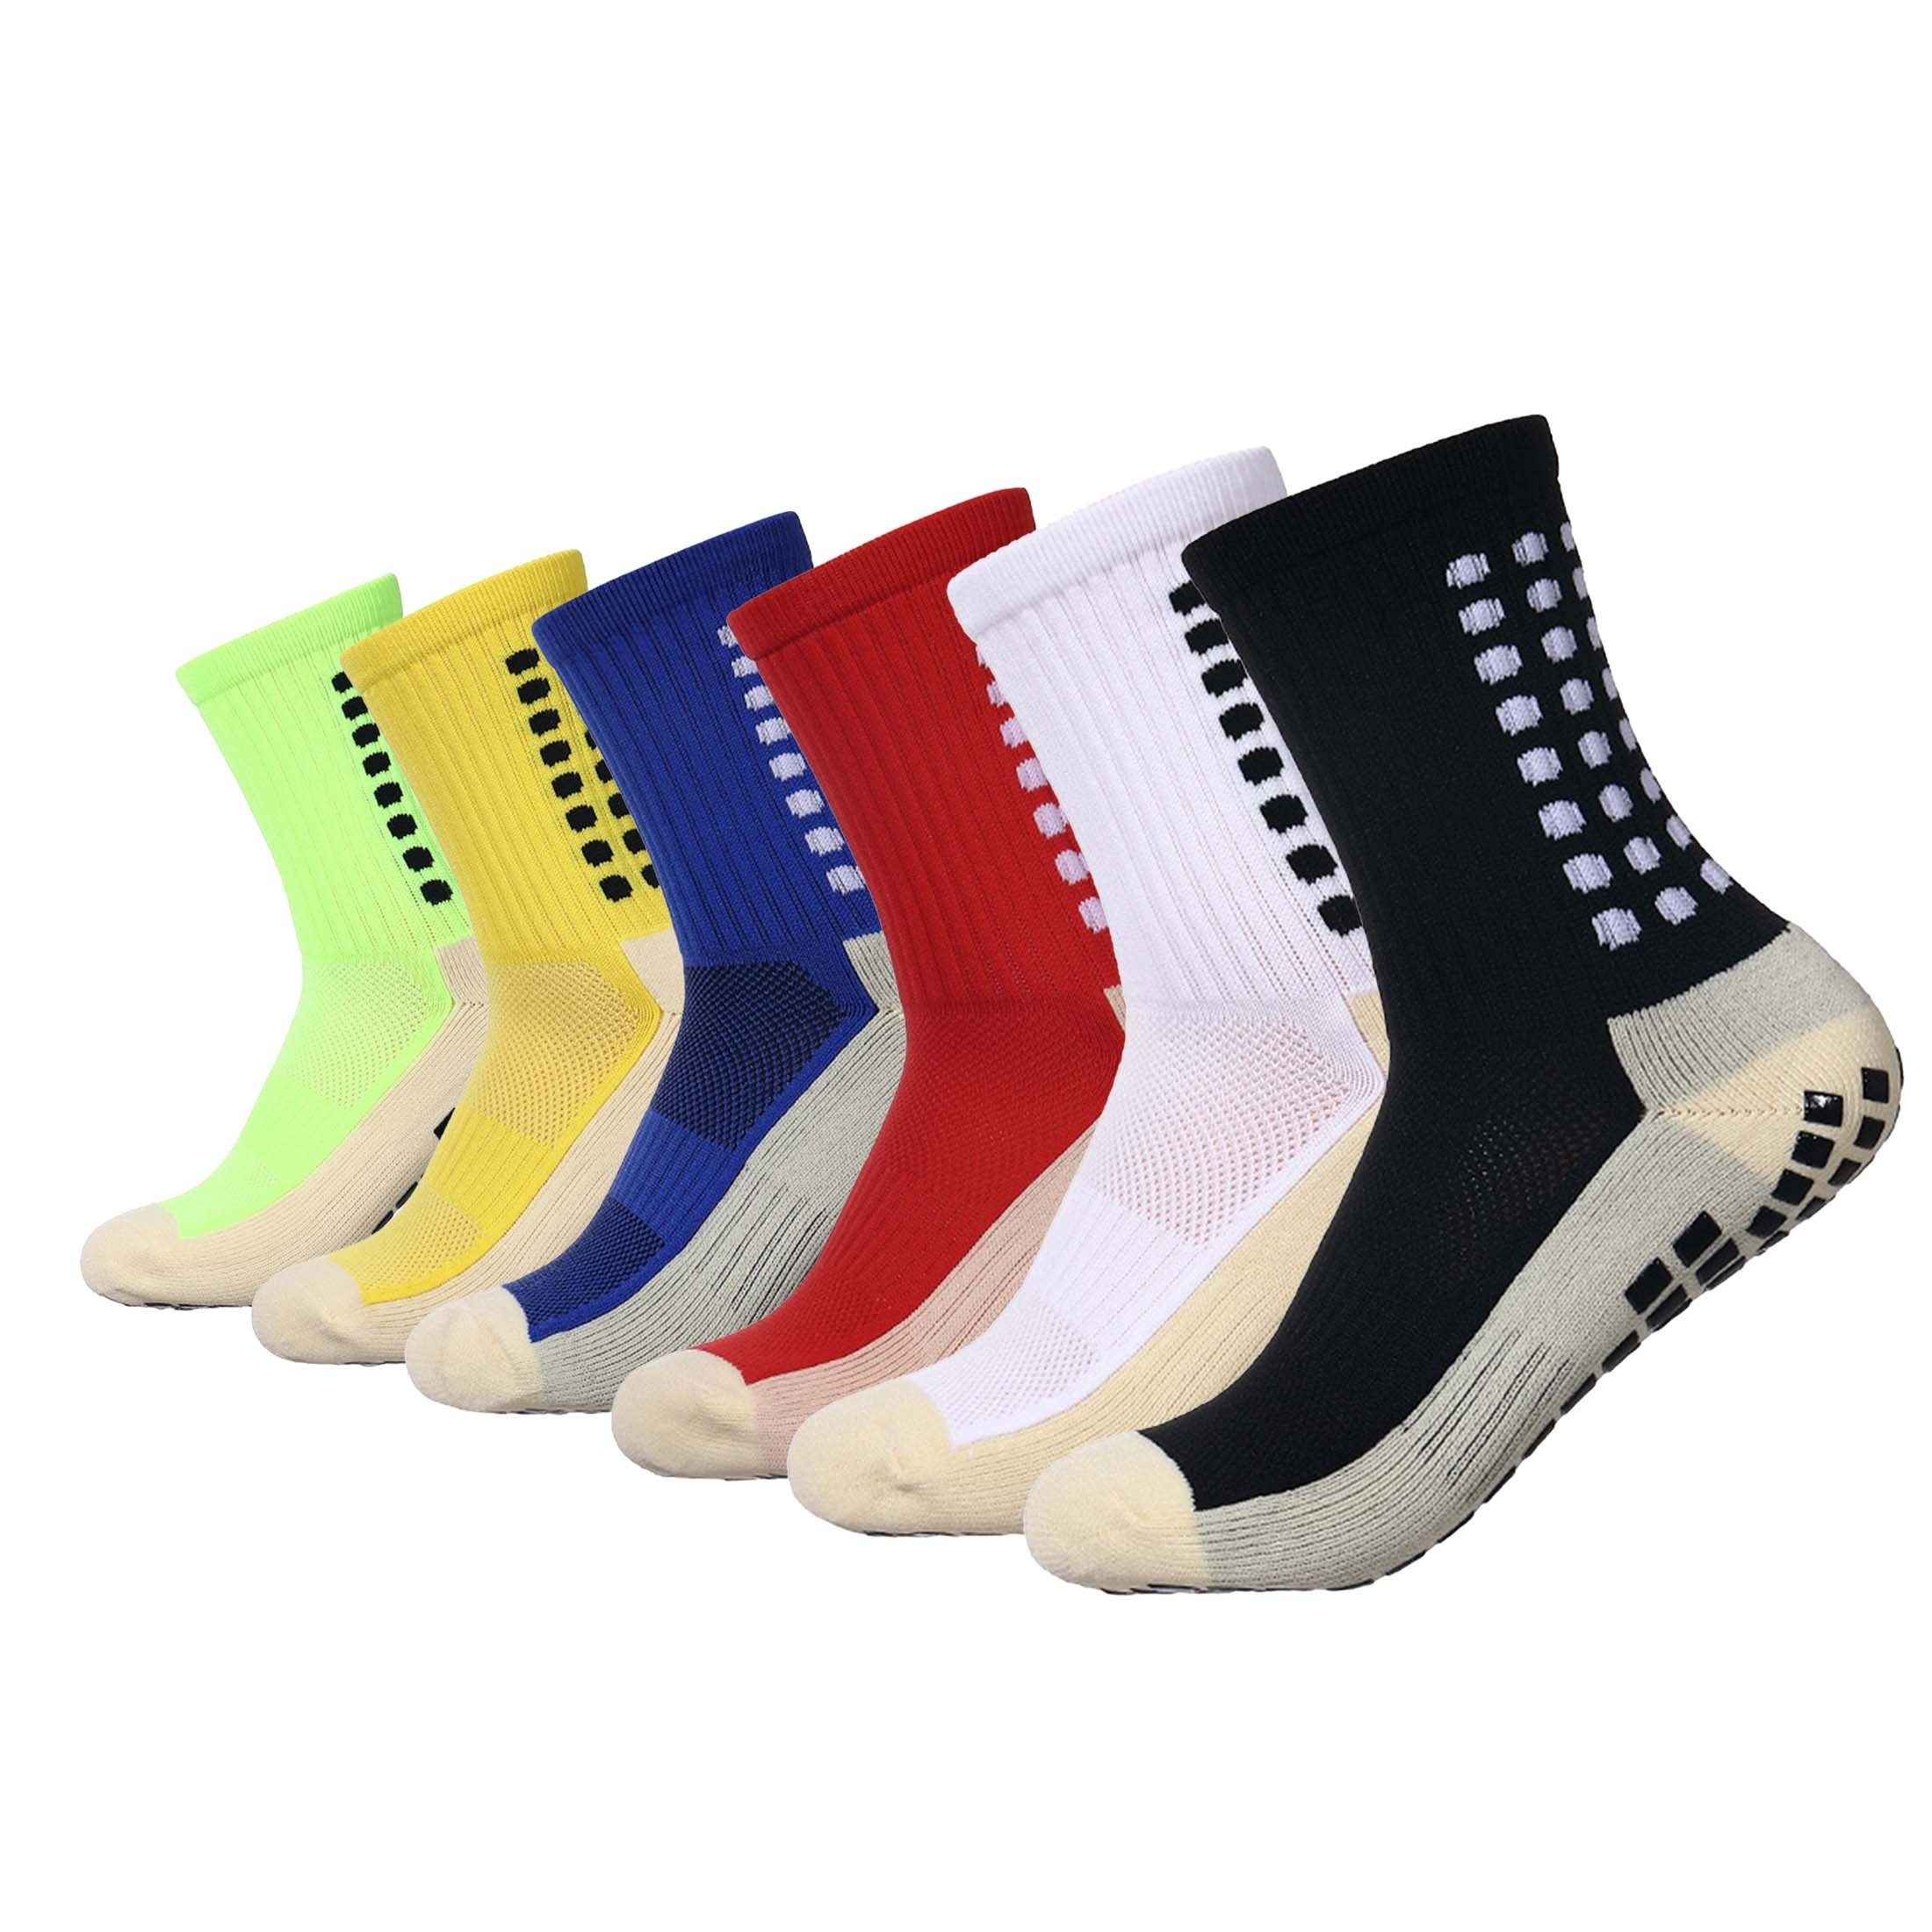 

10 Pairs Soccer Socks, Breathable Cushioned With Non-slip Silicone Grips, Mid-calf Professional Training, For Outdoor Sports, Football Matches, Fitness Workouts